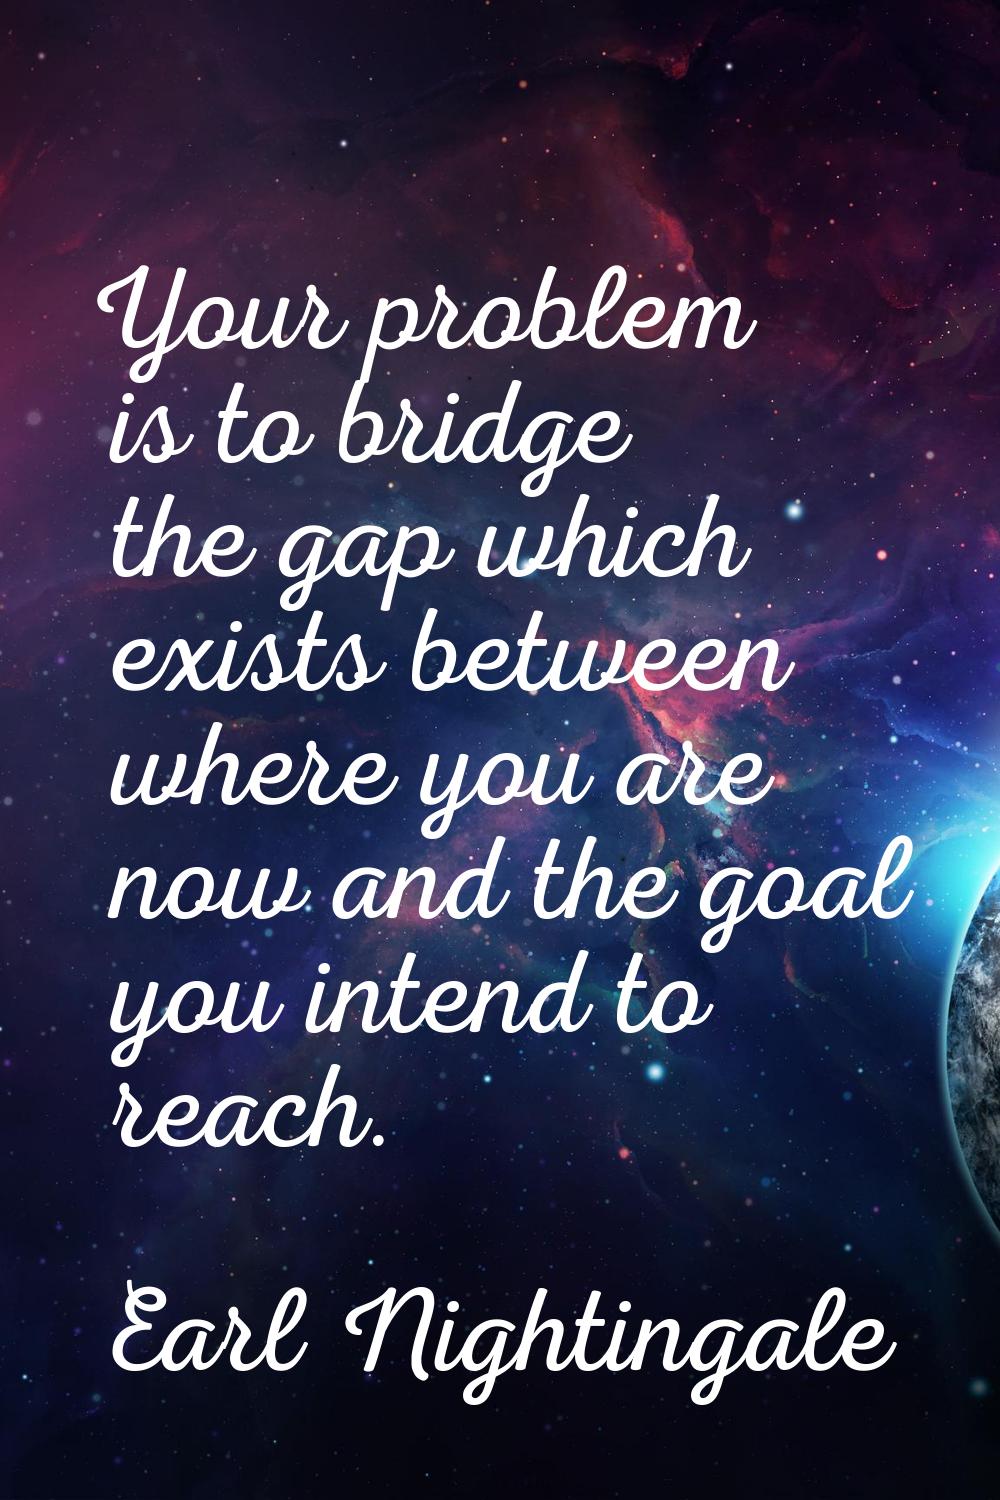 Your problem is to bridge the gap which exists between where you are now and the goal you intend to